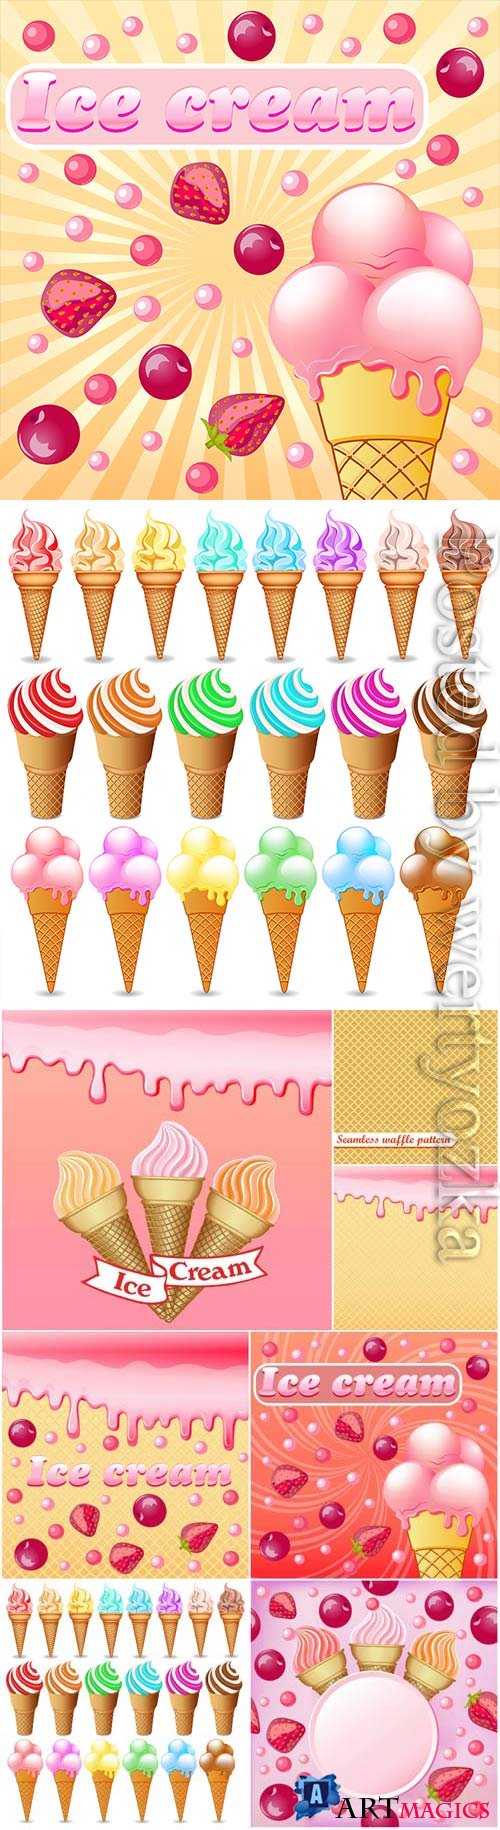 Ice cream with different flavors in vector